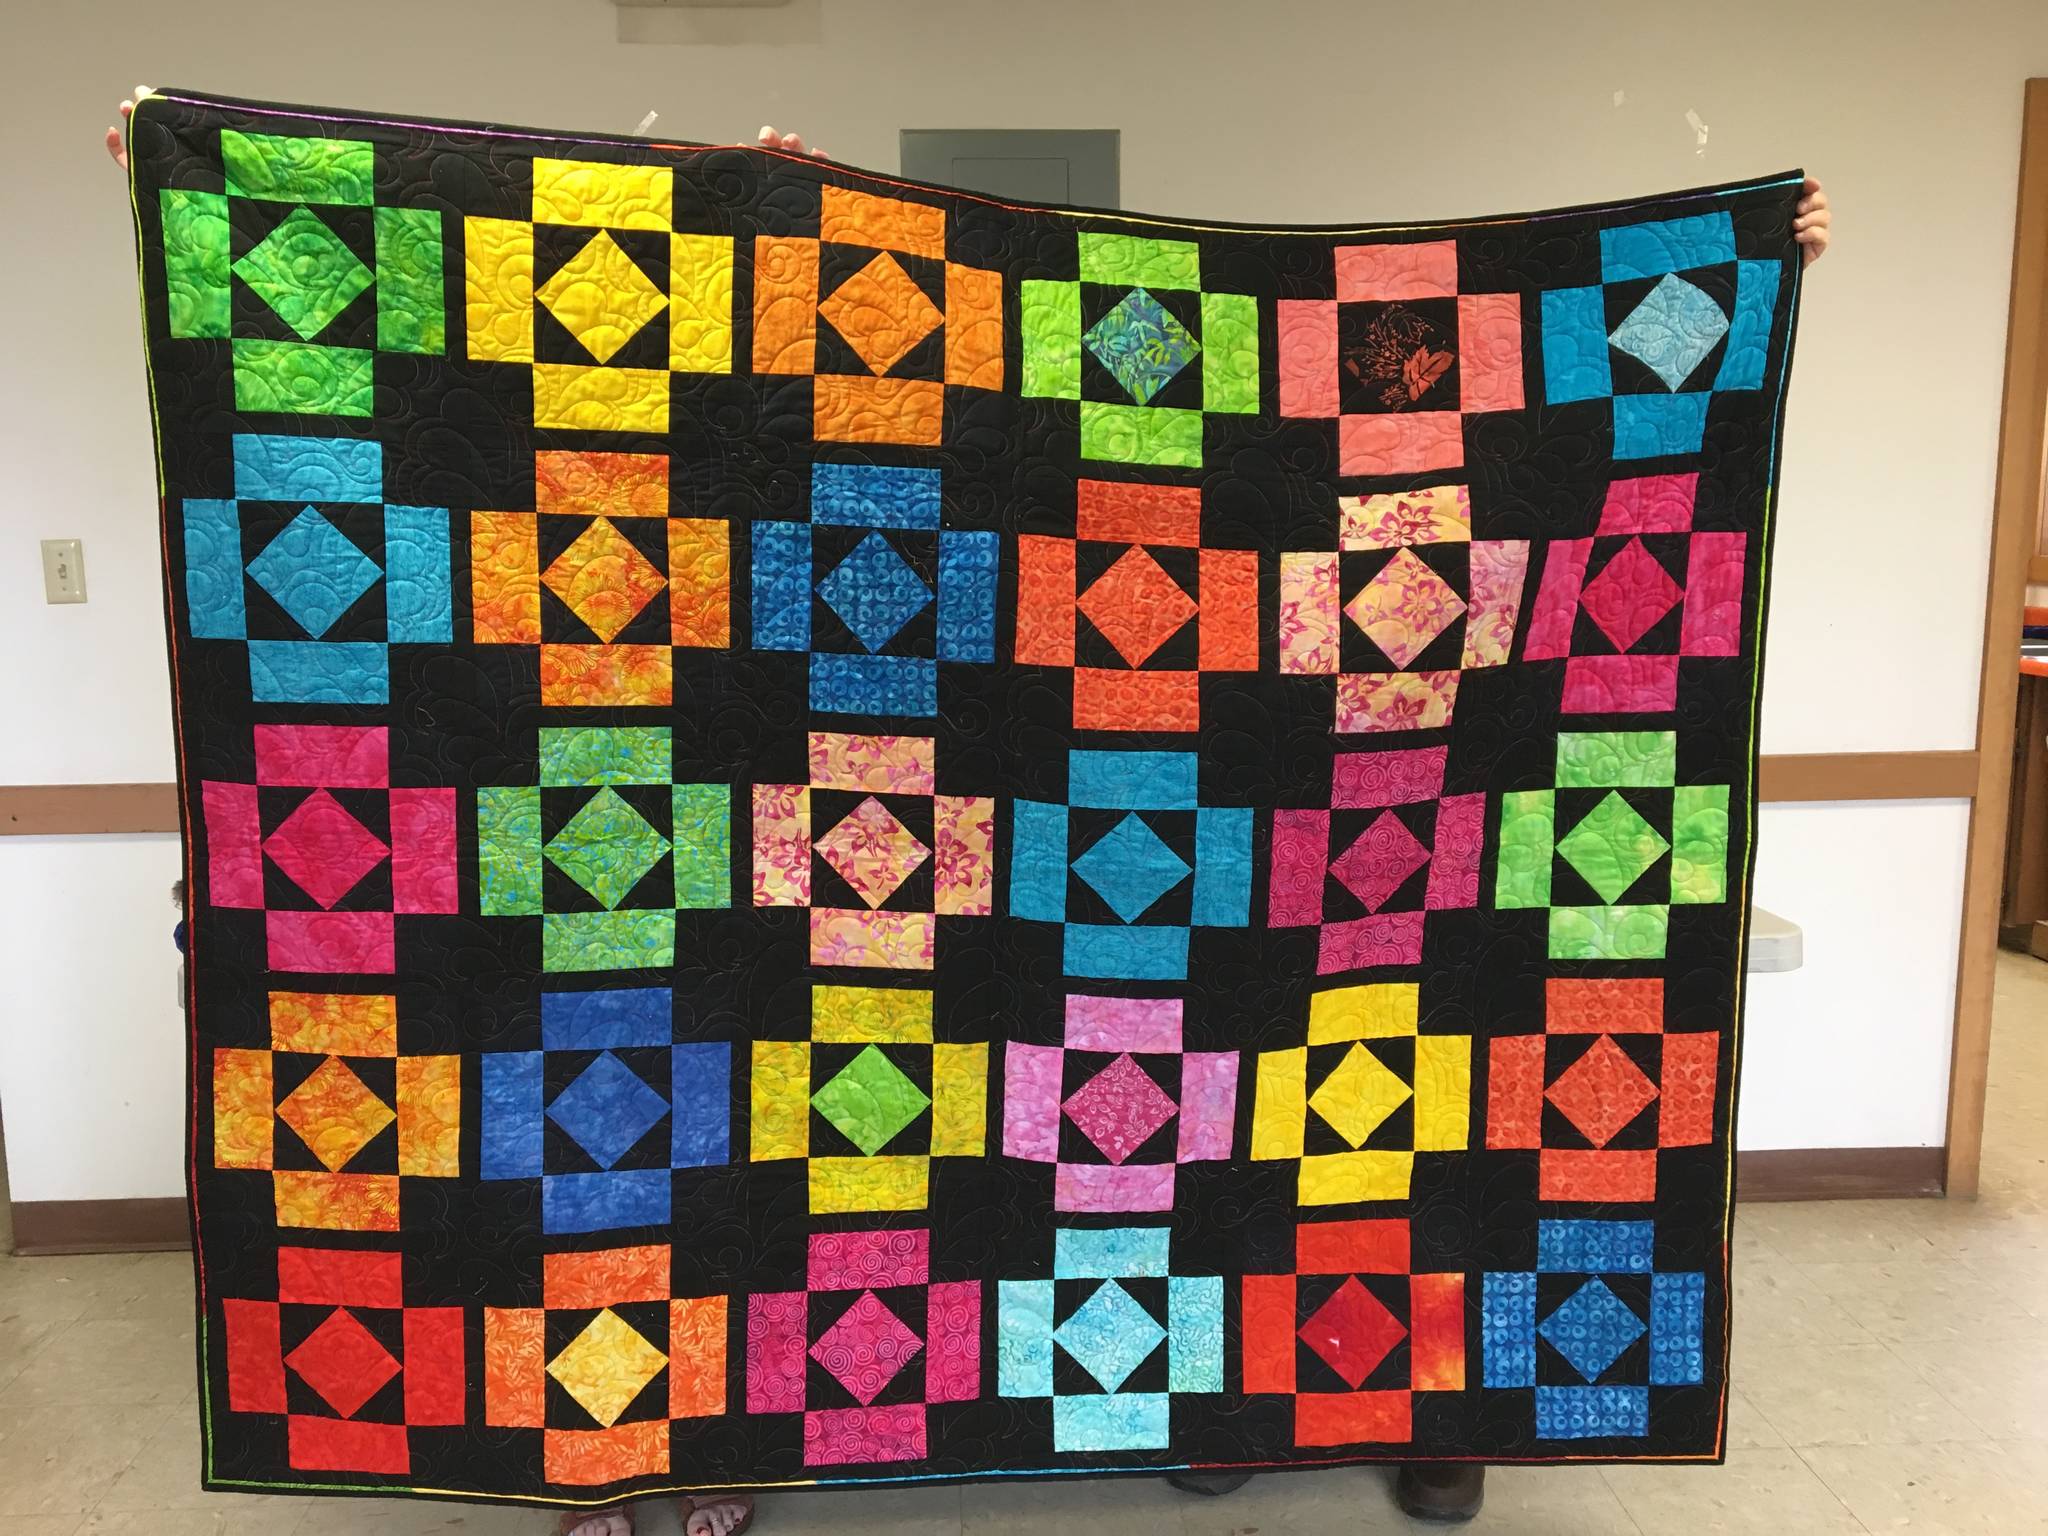 A quilt from the Kachemak Bay Quilters show. (Photo provided)